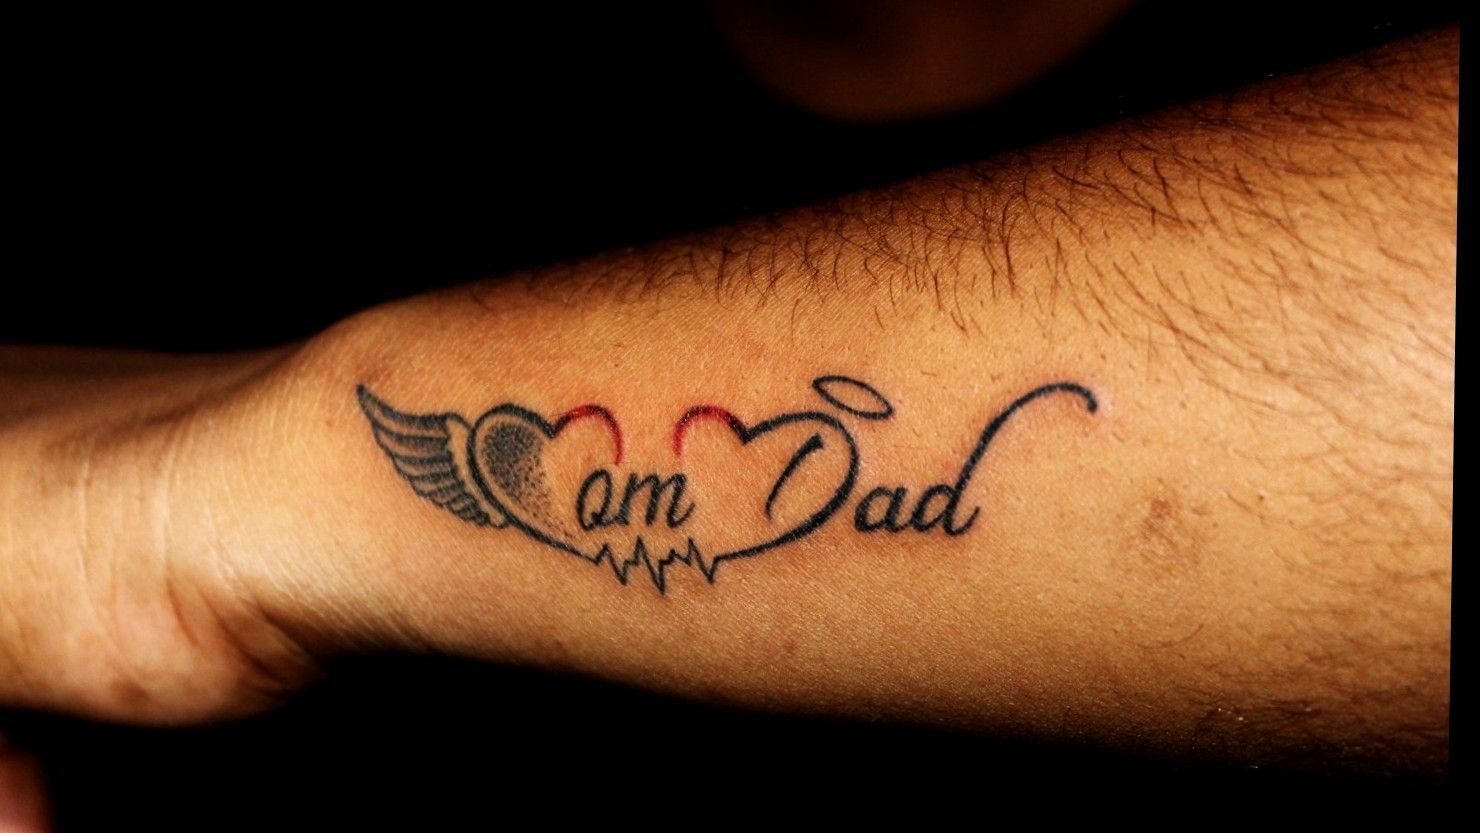 Tattoo uploaded by Shabbir • Mom dad tattoo at OUCH. For bookings call at  7382521886, 9848597806 • Tattoodo